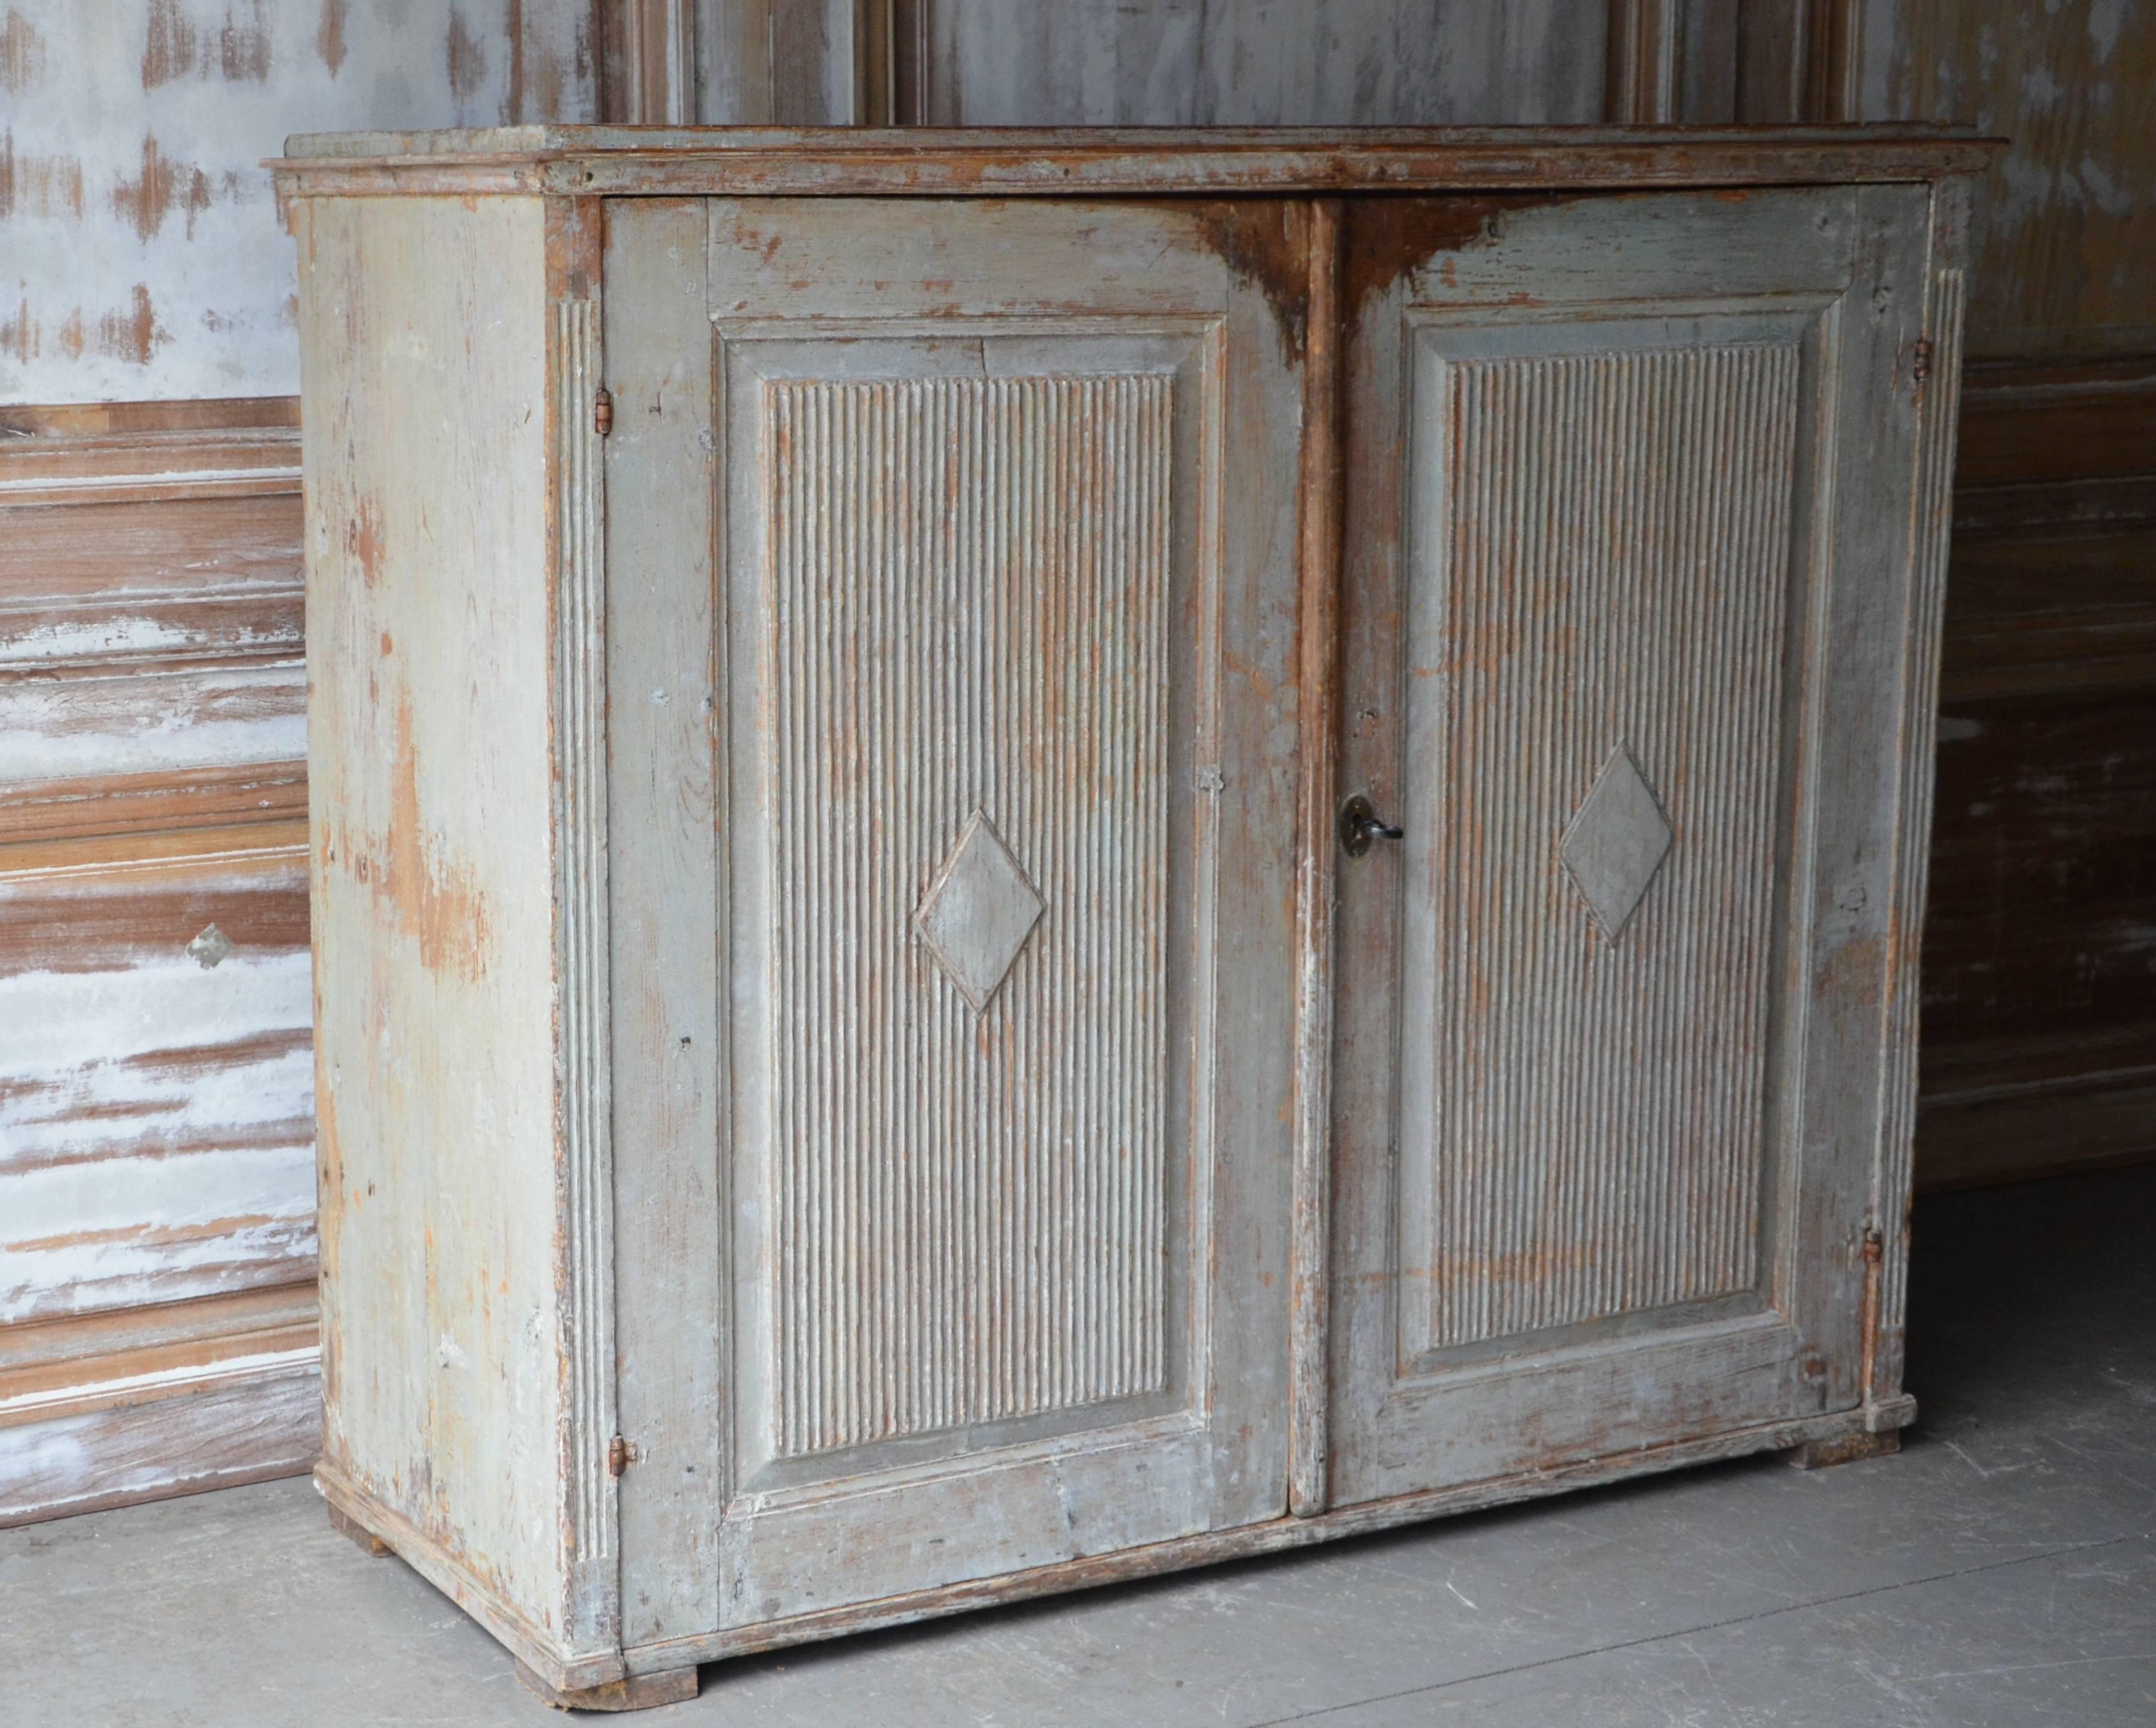 A richly carved Gustavian period sideboard has reeded paneled doors with central diamond shape lozenges, reeded corner posts in wonderful worn pale blue/grey patina. This antique sideboard offers plenty of practical storage,
Stockholm, Sweden,